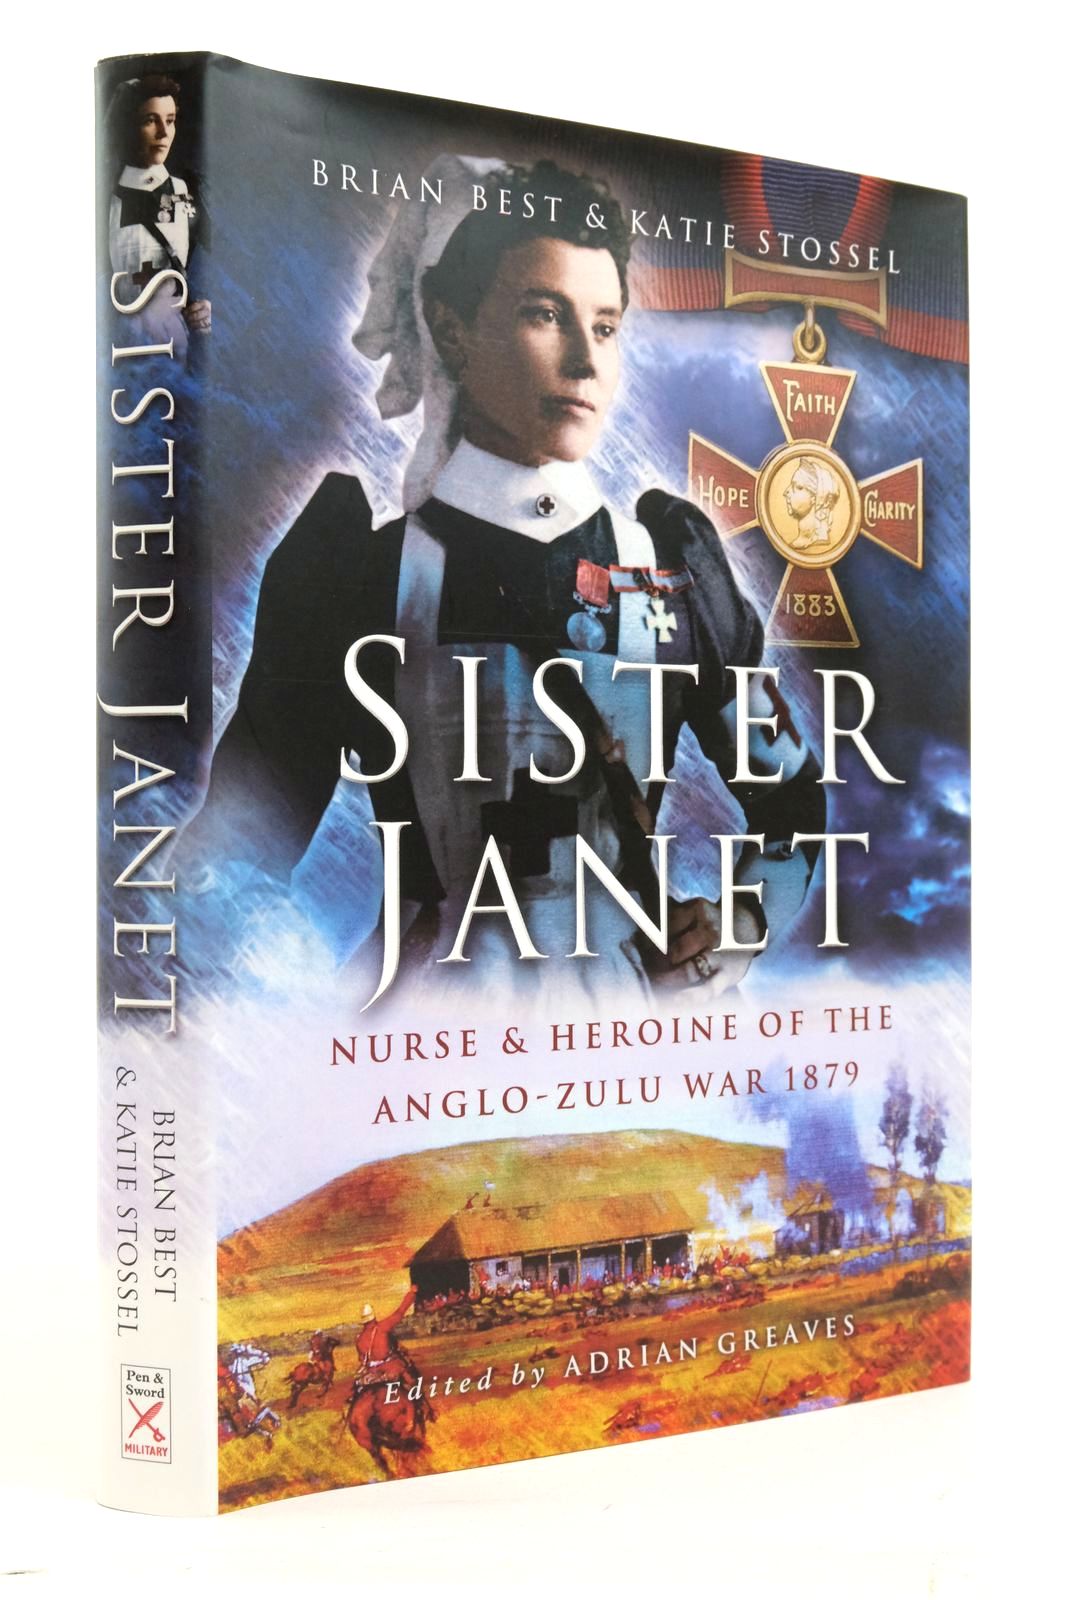 Photo of SISTER JANET NURSE AND HEROINE OF THE ANGLO-ZULU WAR written by Best, Brian Stossel, Katie published by Pen &amp; Sword Military (STOCK CODE: 2138334)  for sale by Stella & Rose's Books